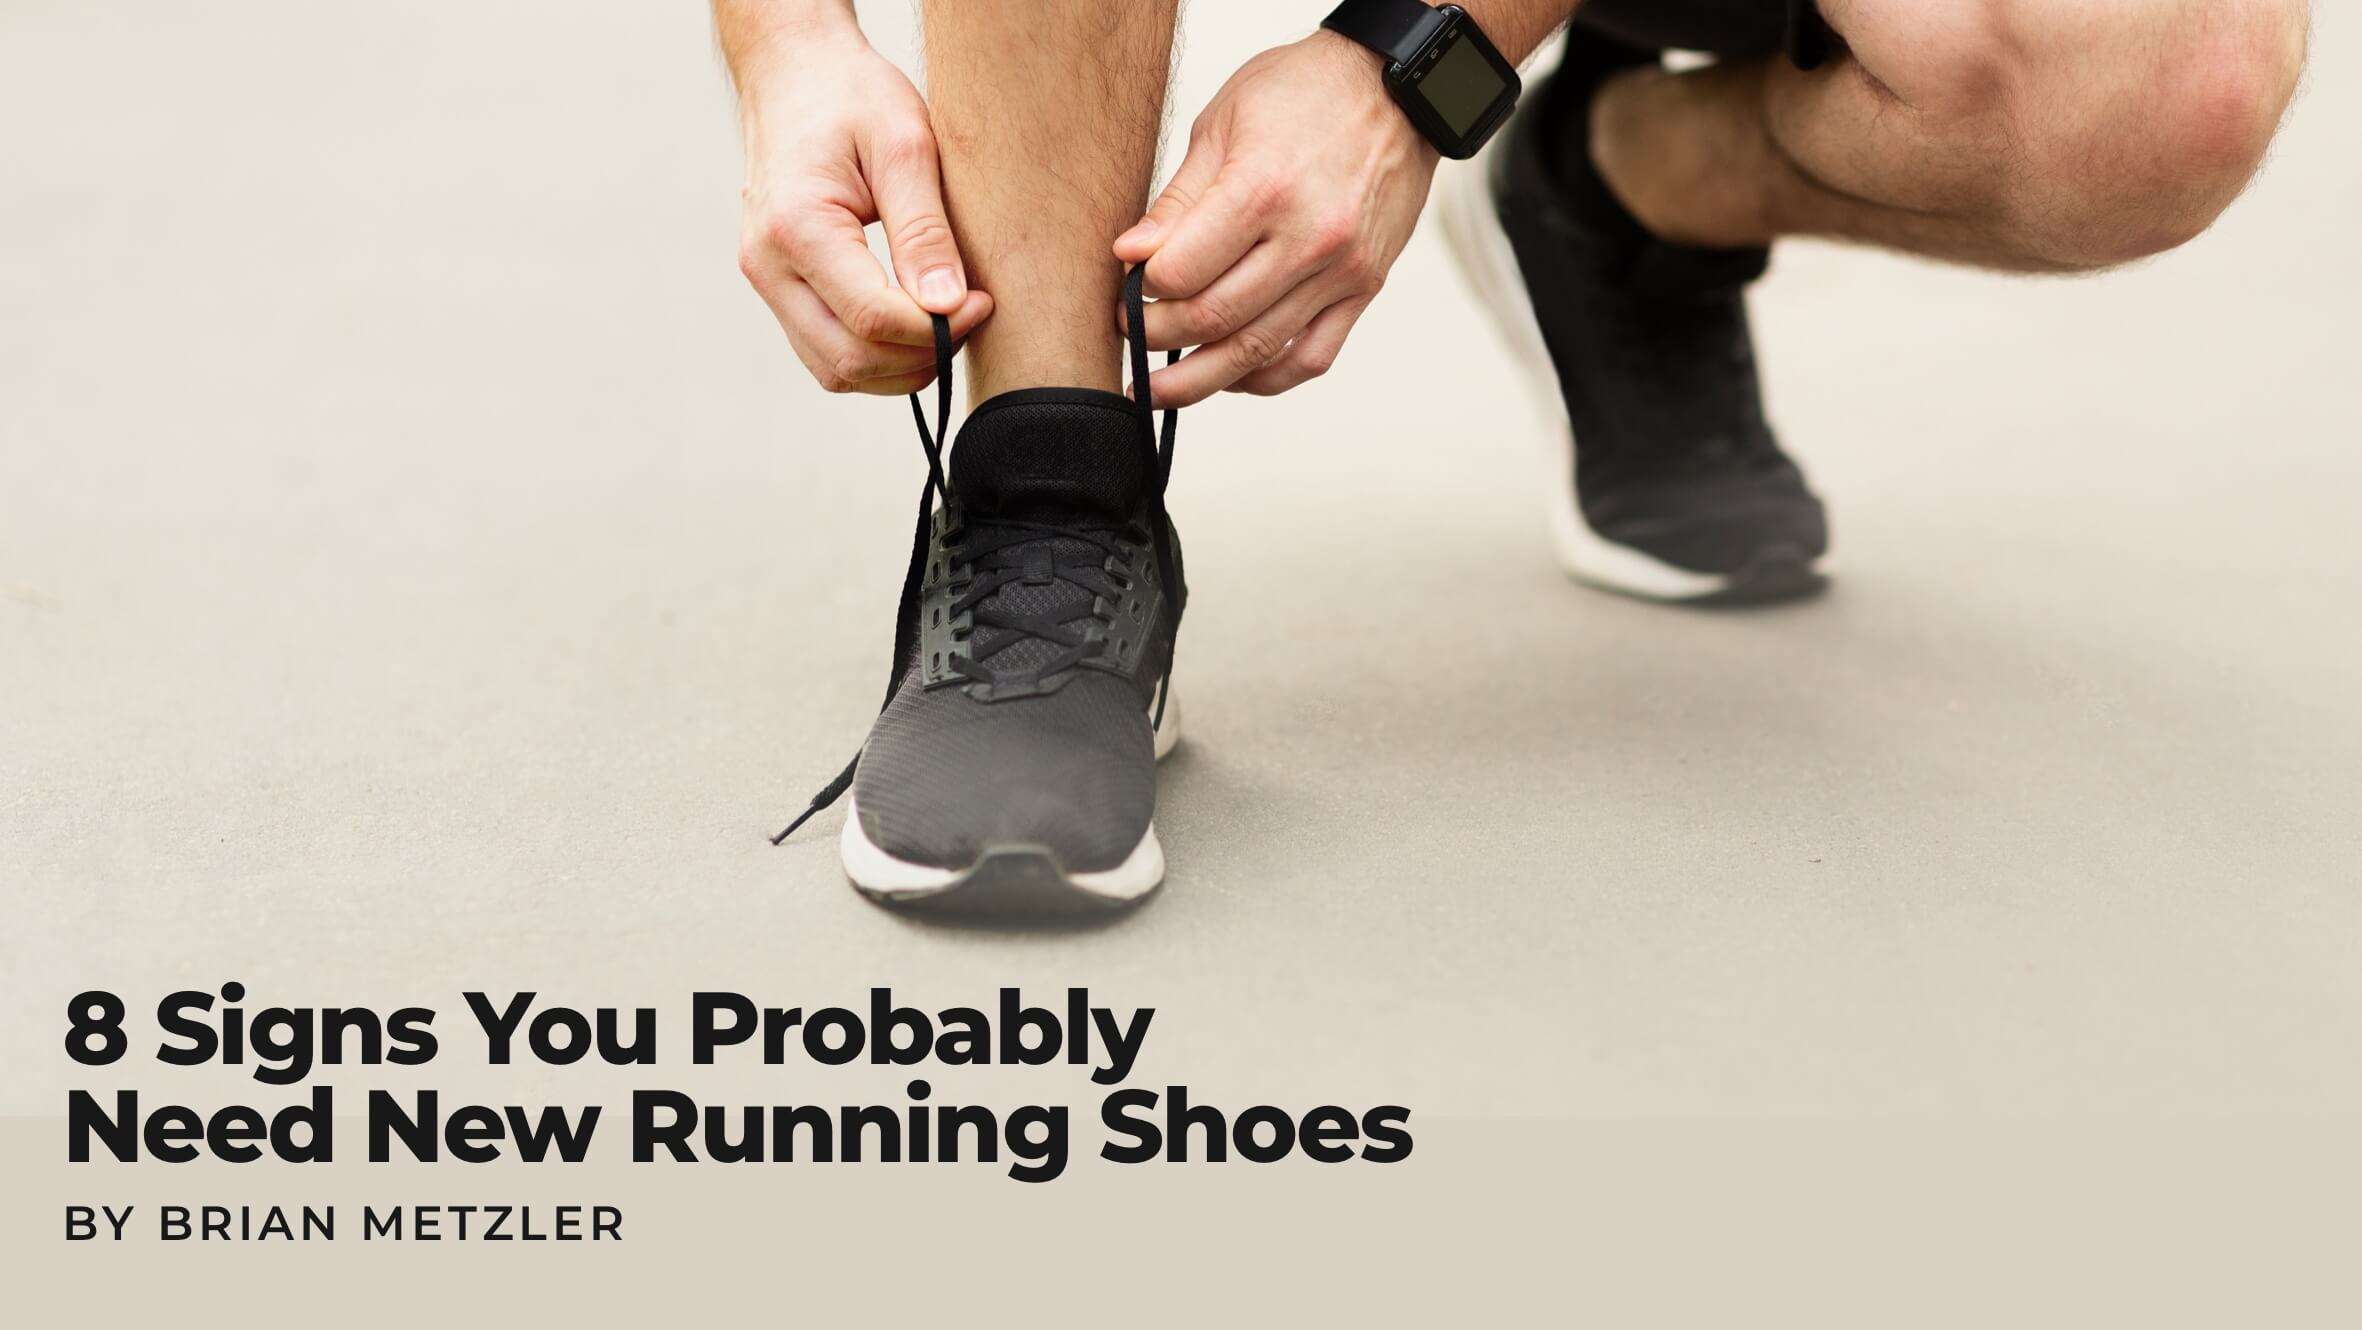 8 SIGNS YOU PROBABLY NEED NEW RUNNING SHOES